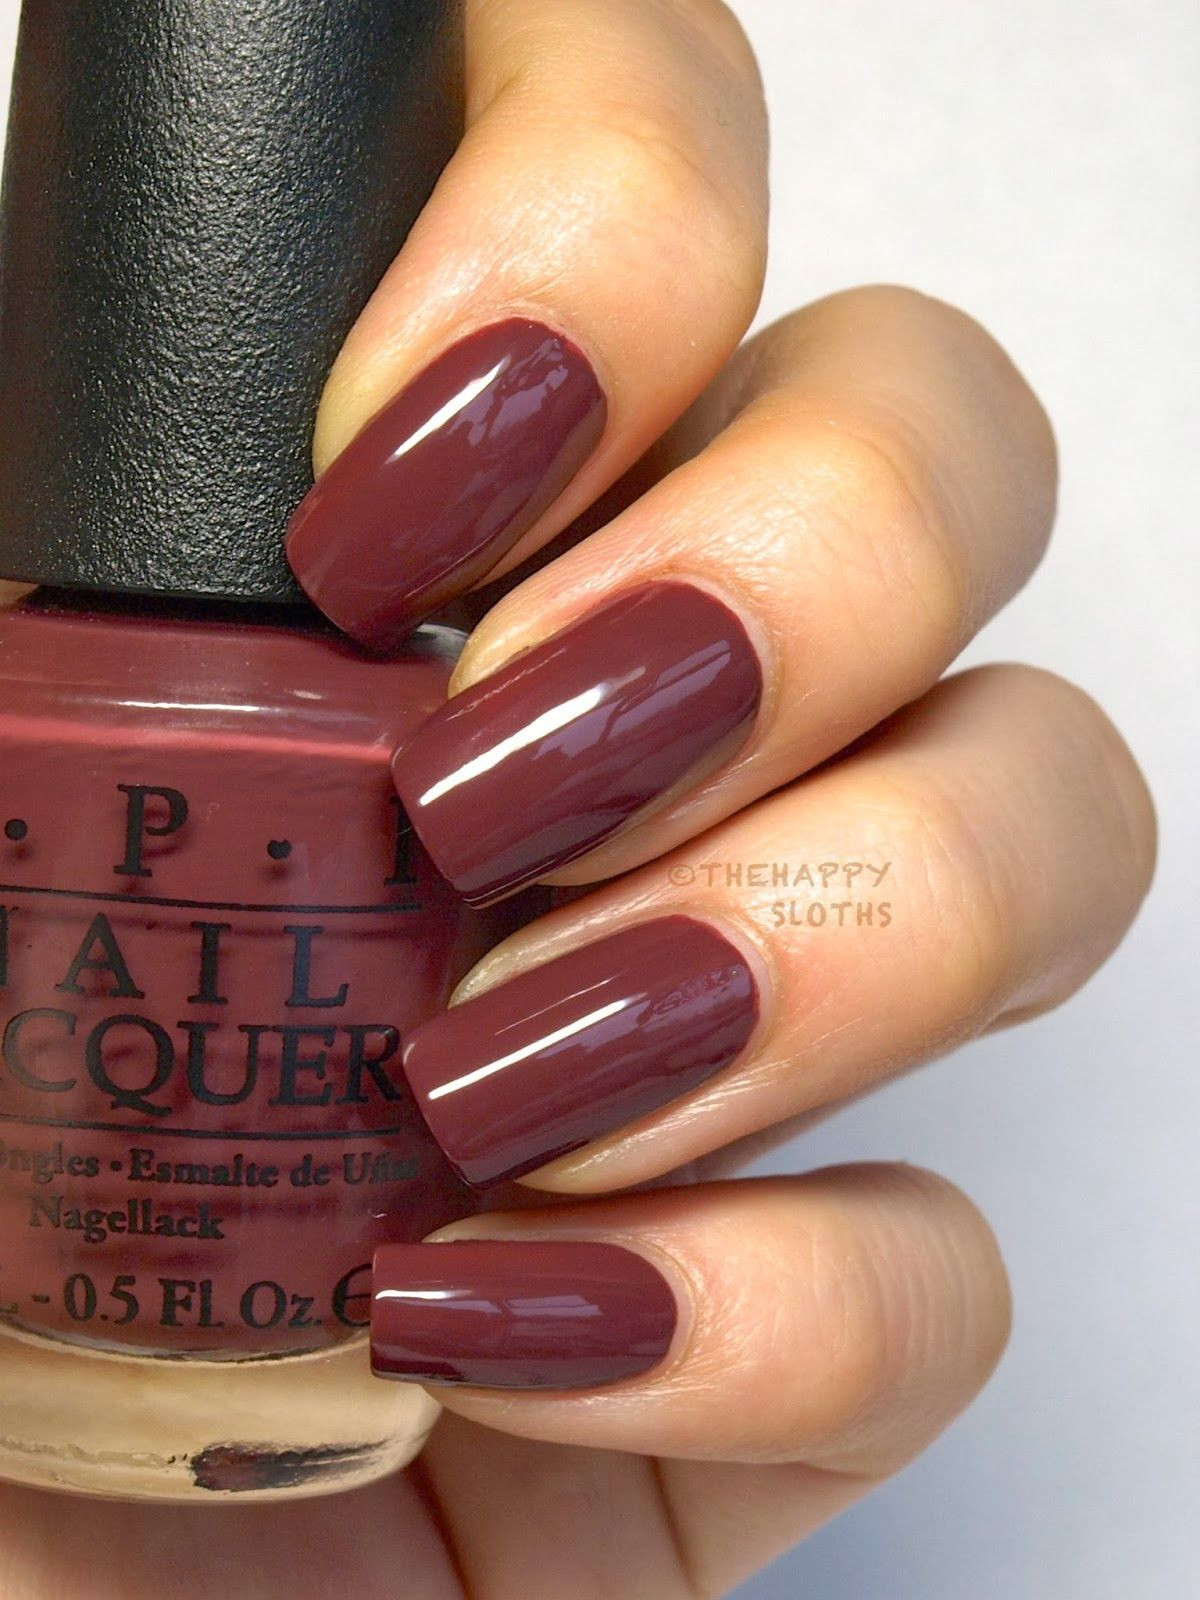 Fall Nail Colors Pinterest
 The Happy Sloths OPI Brazil Collection S S 2014 Nail